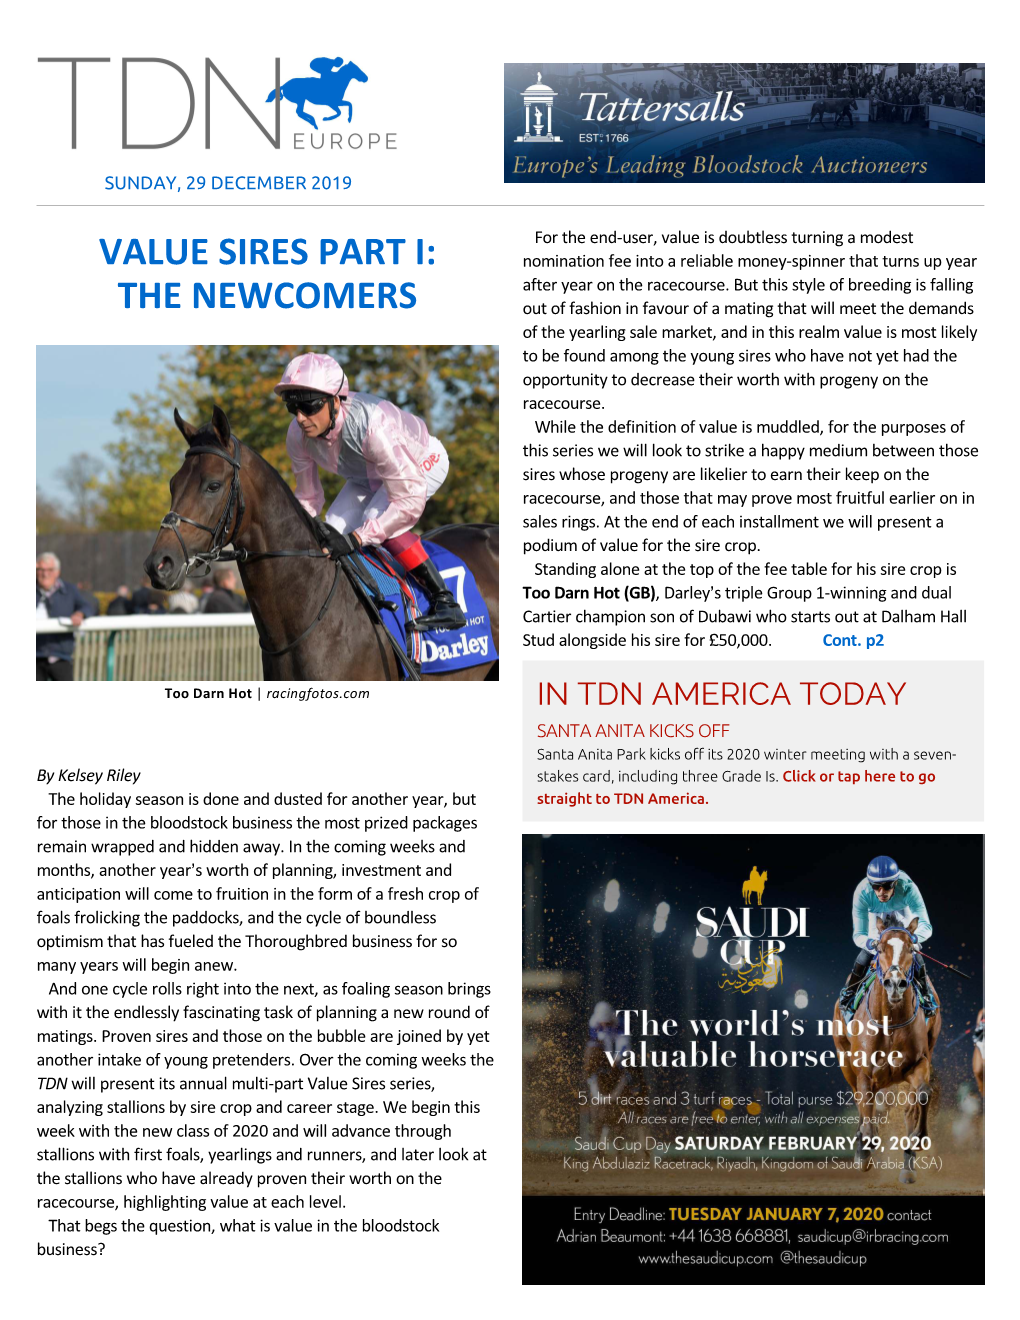 VALUE SIRES PART I: Nomination Fee Into a Reliable Money-Spinner That Turns up Year After Year on the Racecourse